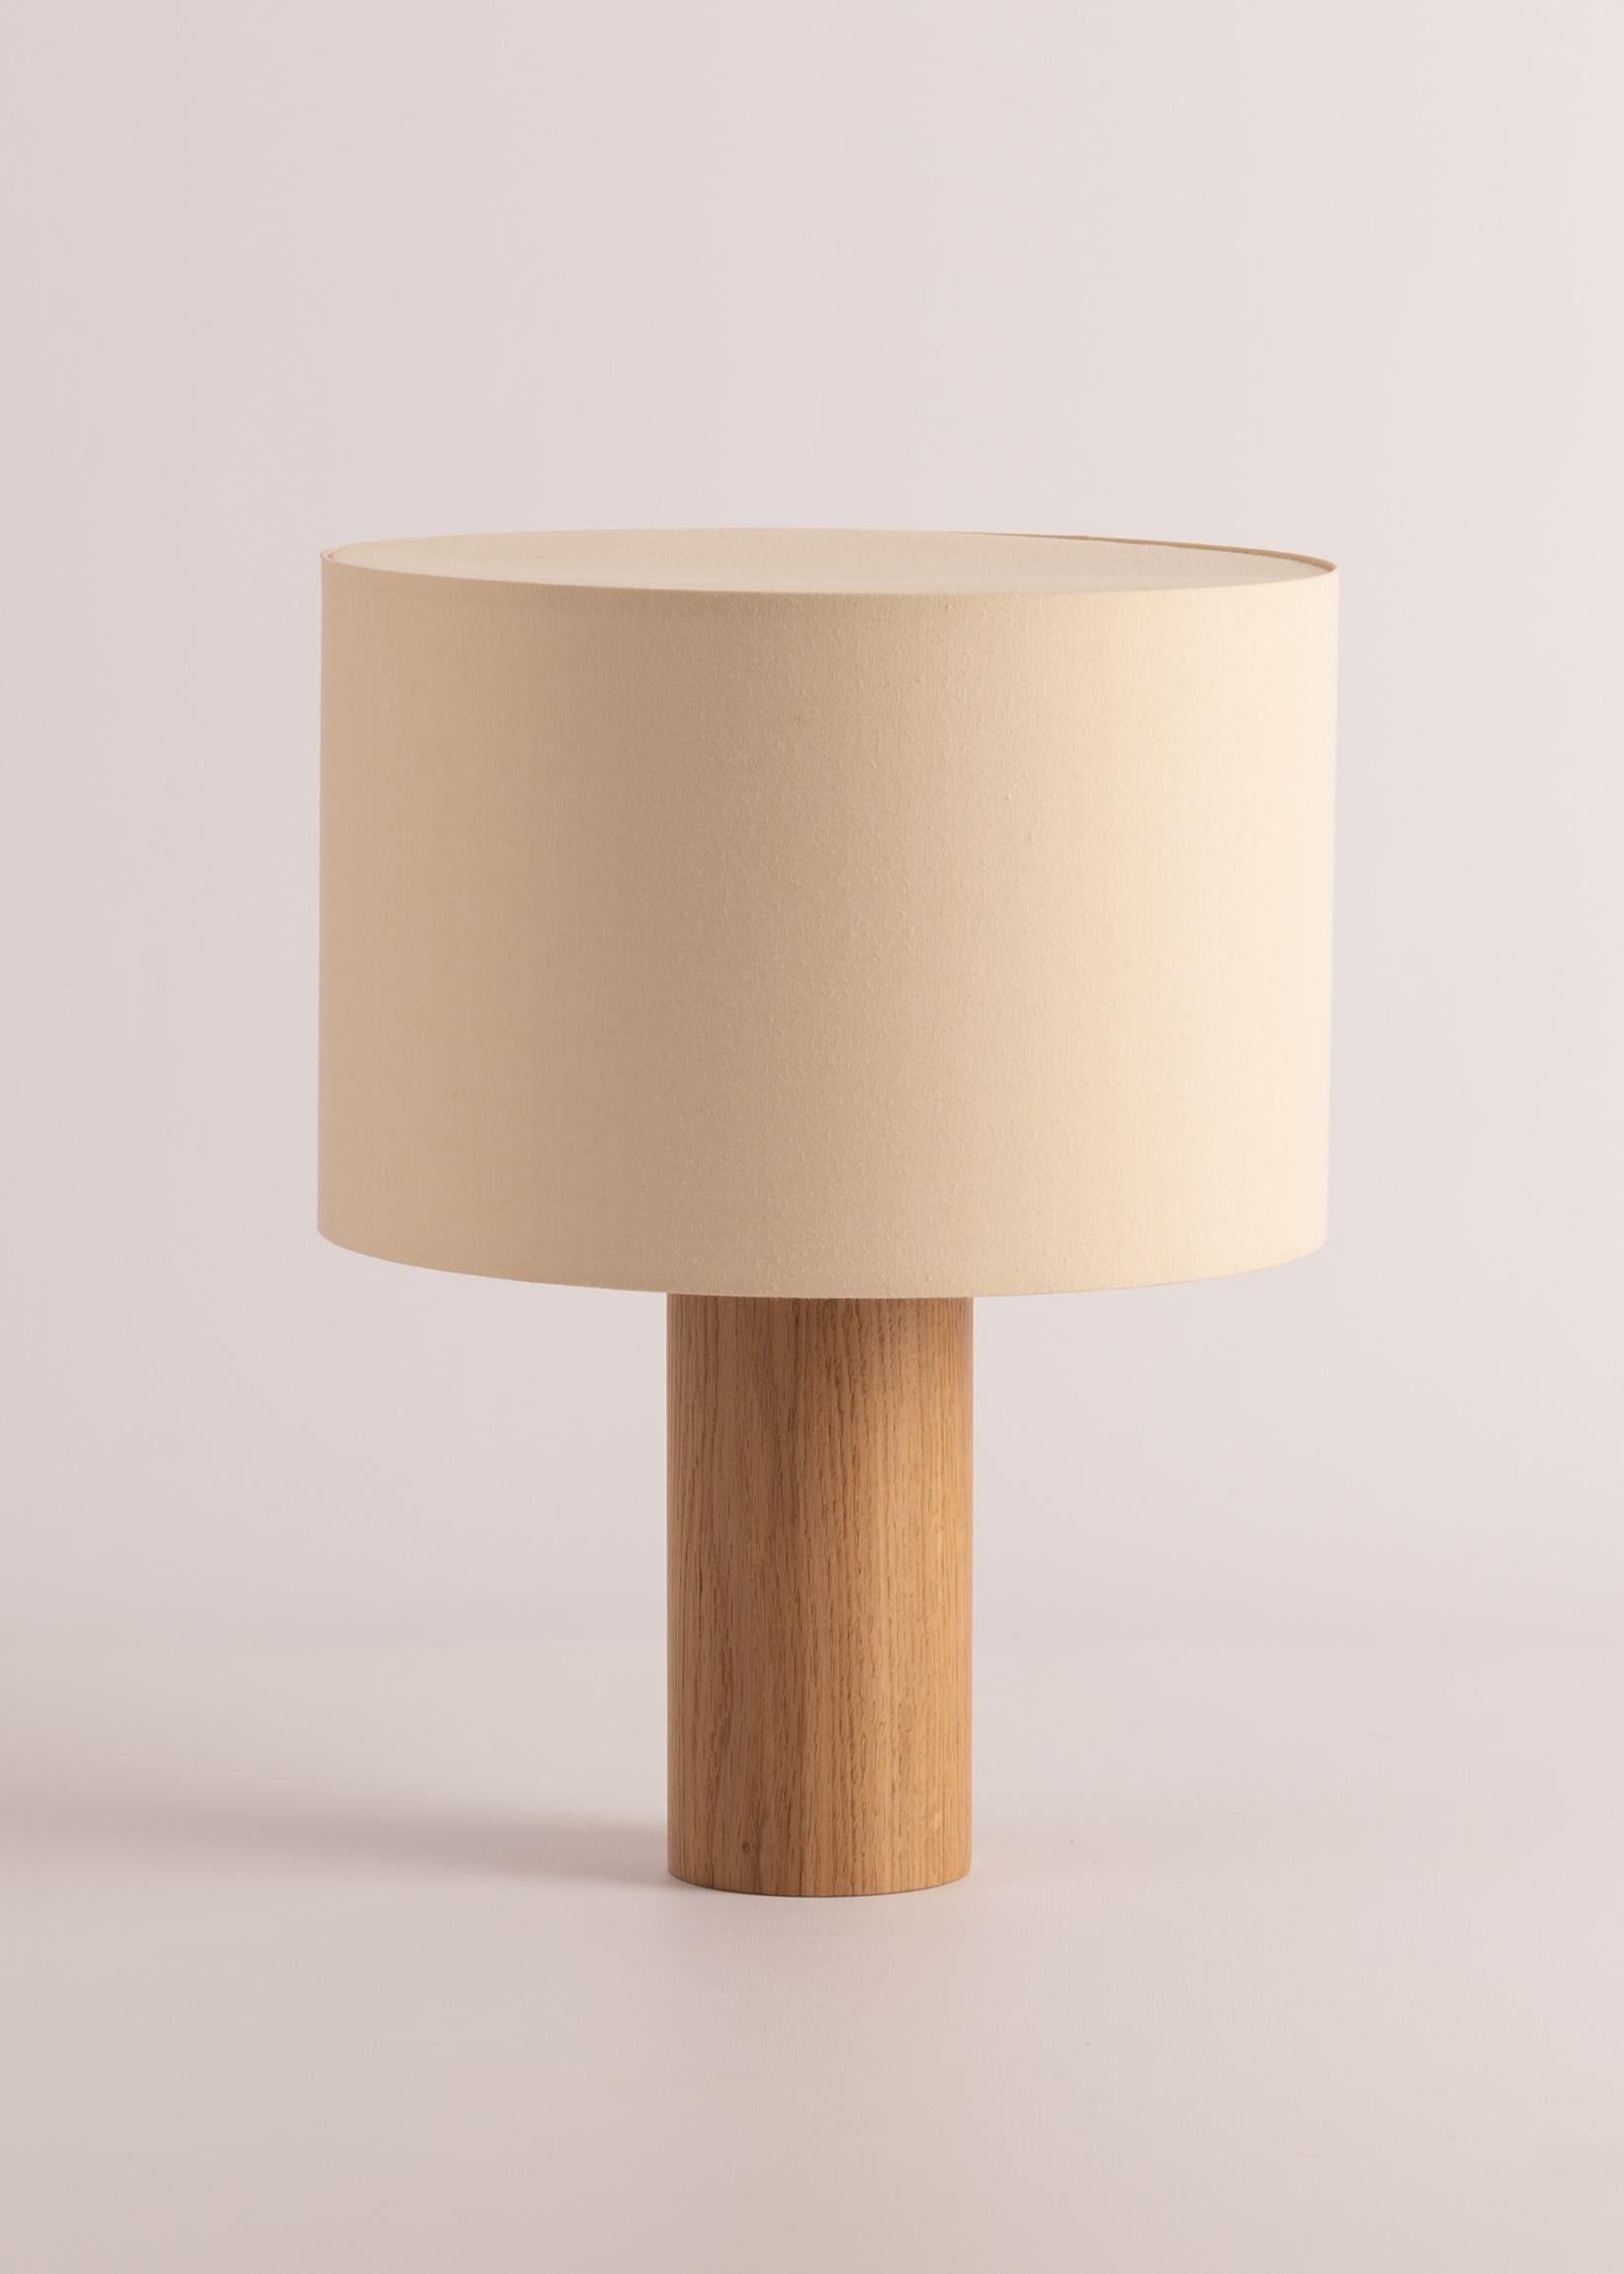 Oak Pipito Table Lamp by Simone & Marcel
Dimensions: Ø 30 x H 40 cm.
Materials: Cotton and oak.

Also available in different marble and wood options and finishes. Custom options available on request. Please contact us. 

All our lamps can be wired